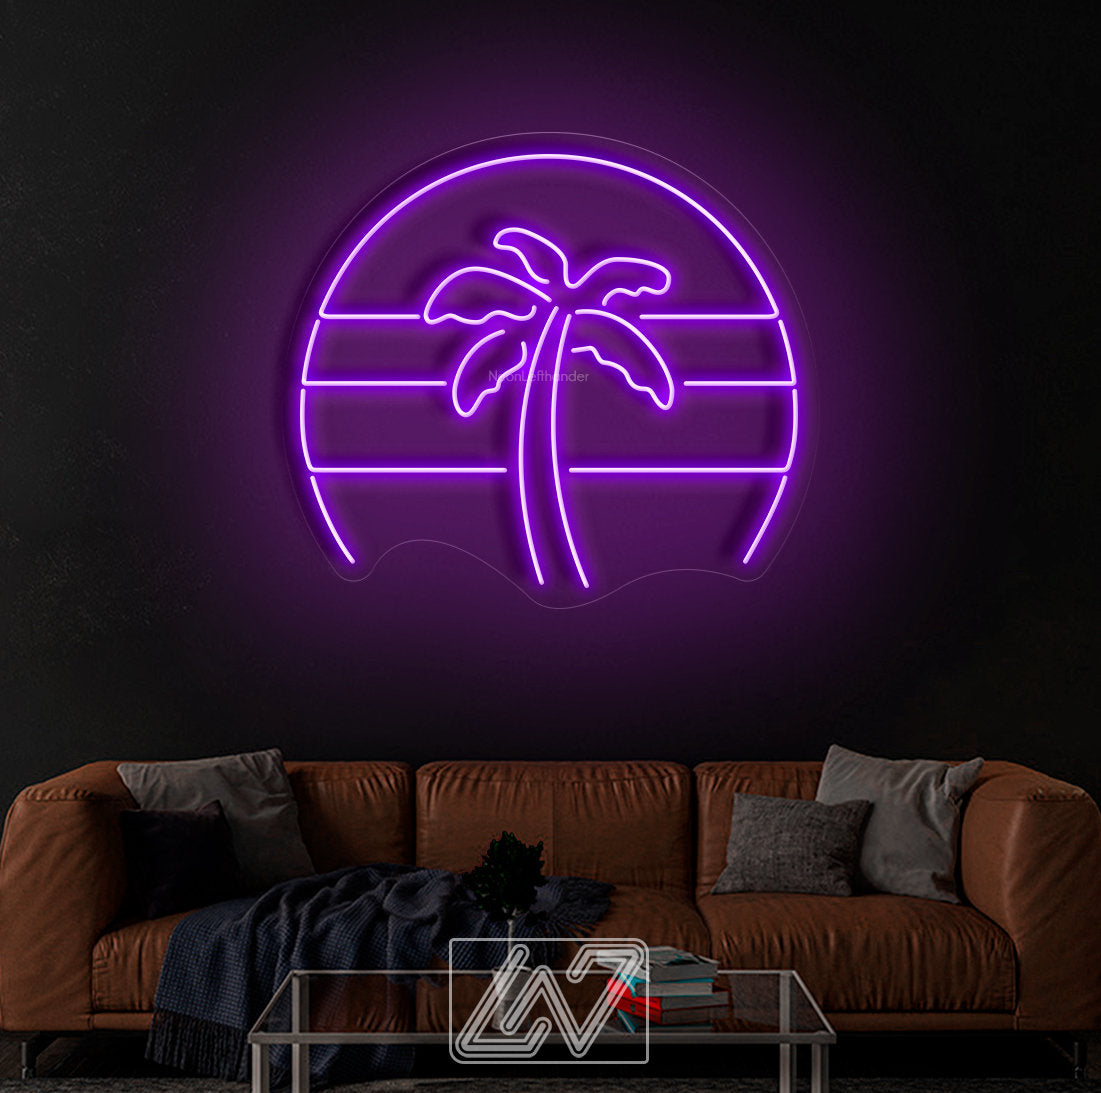 Palm tree - LED Neon Sign,Gift, Wall Decor, 80s, Rainbow ,Neon Company Logo ,Bright Neon Lights ,Neon Workplace Signs